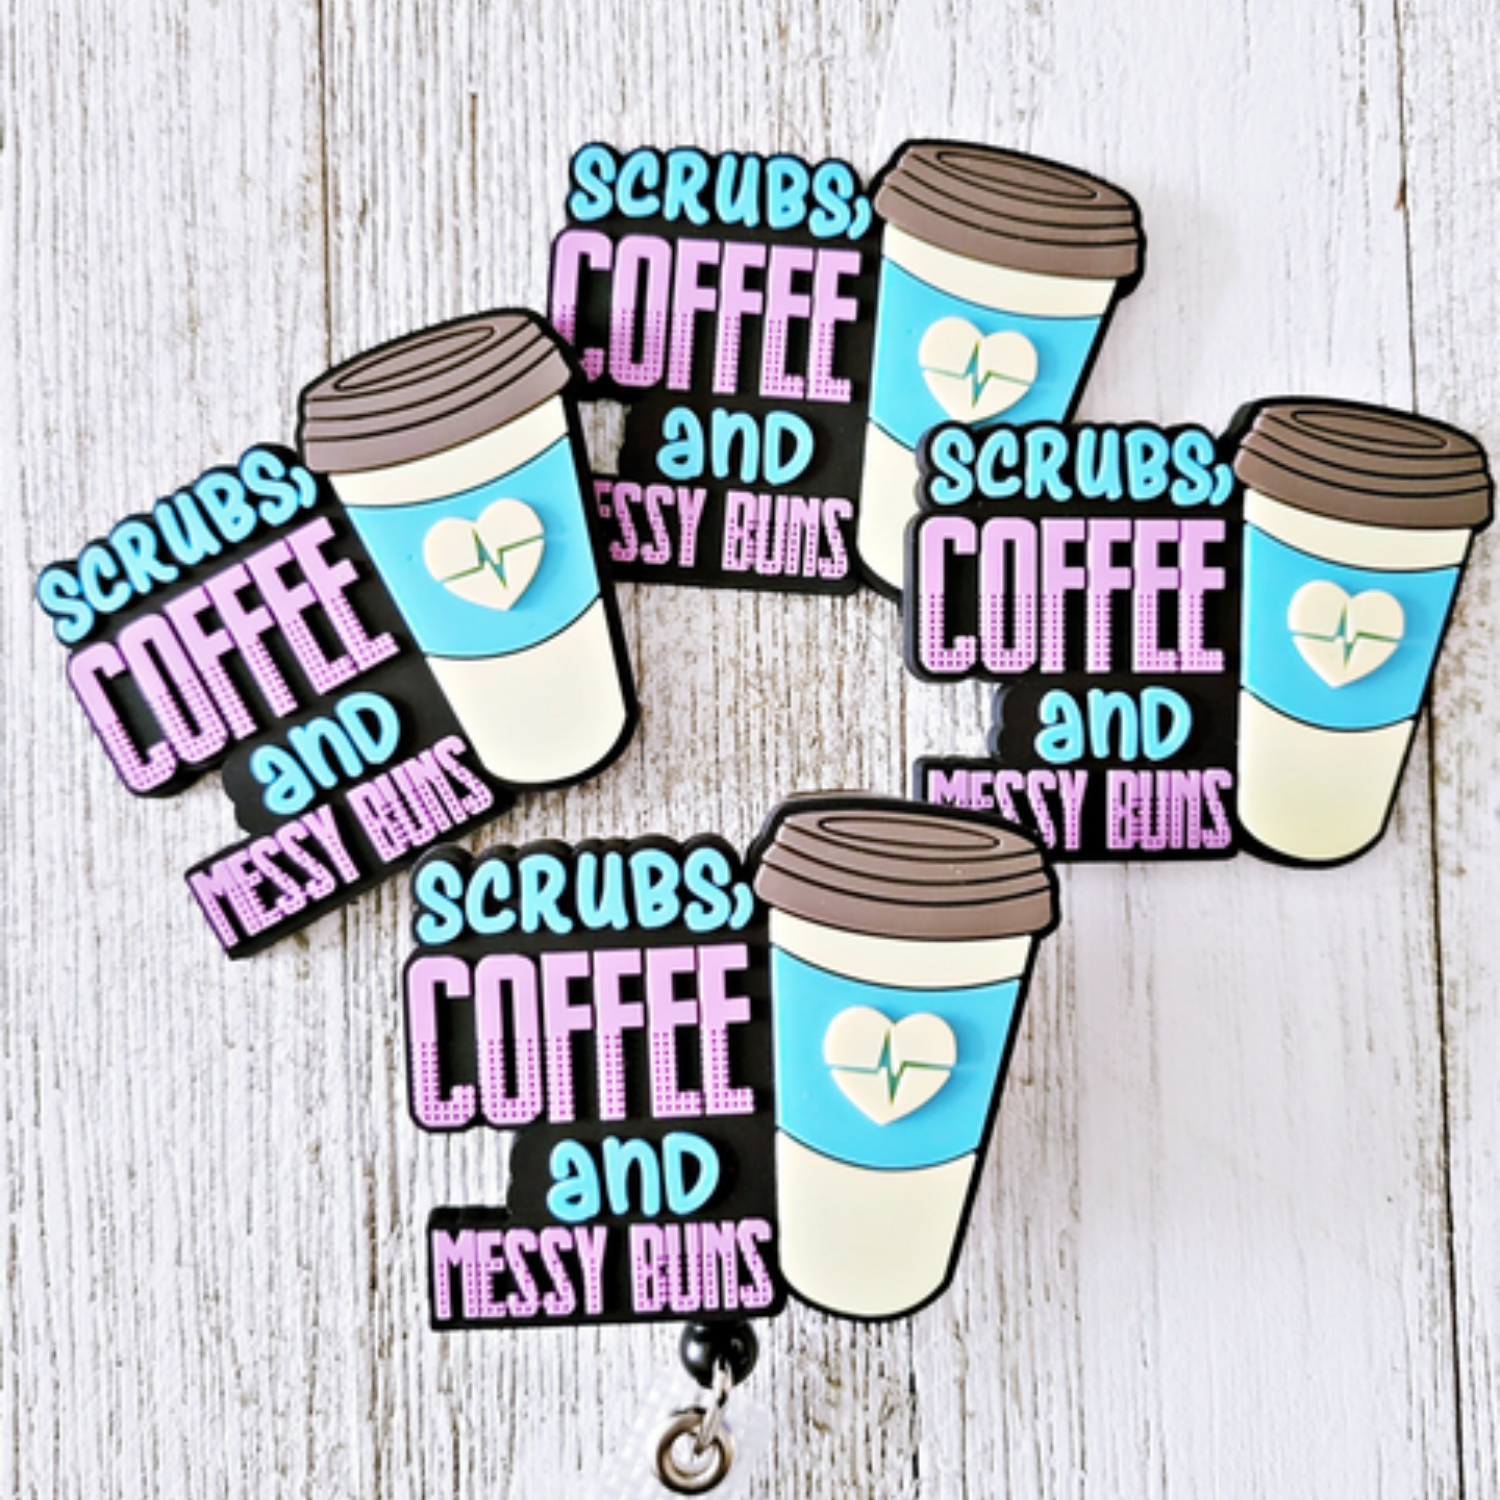 Scrubs Coffee and Messy Buns Badge Reel